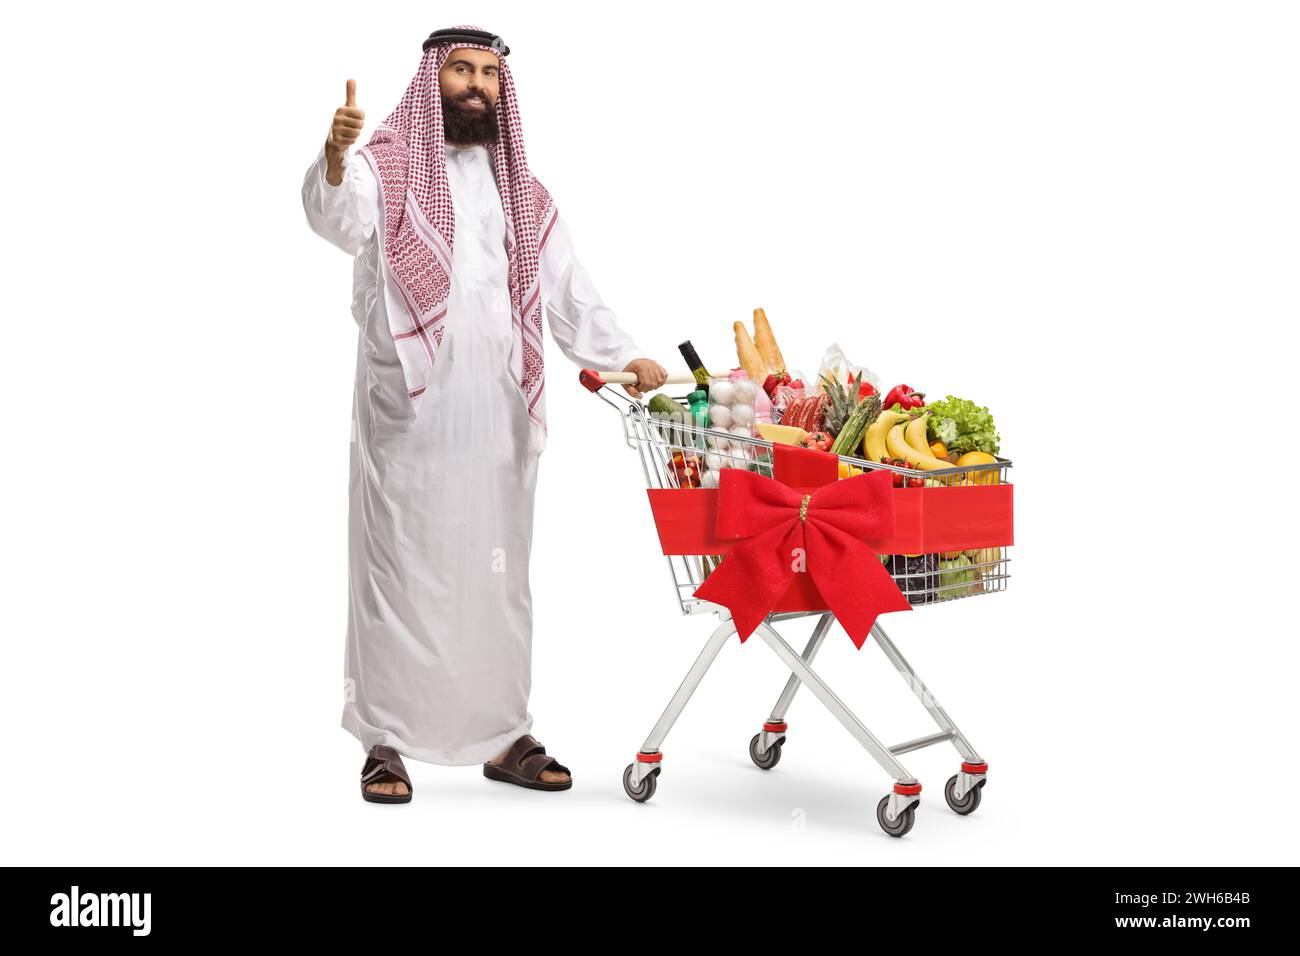 Arab man standing with a shopping cart full of food products and showing a thumb up sign isolated on white background Stock Photo